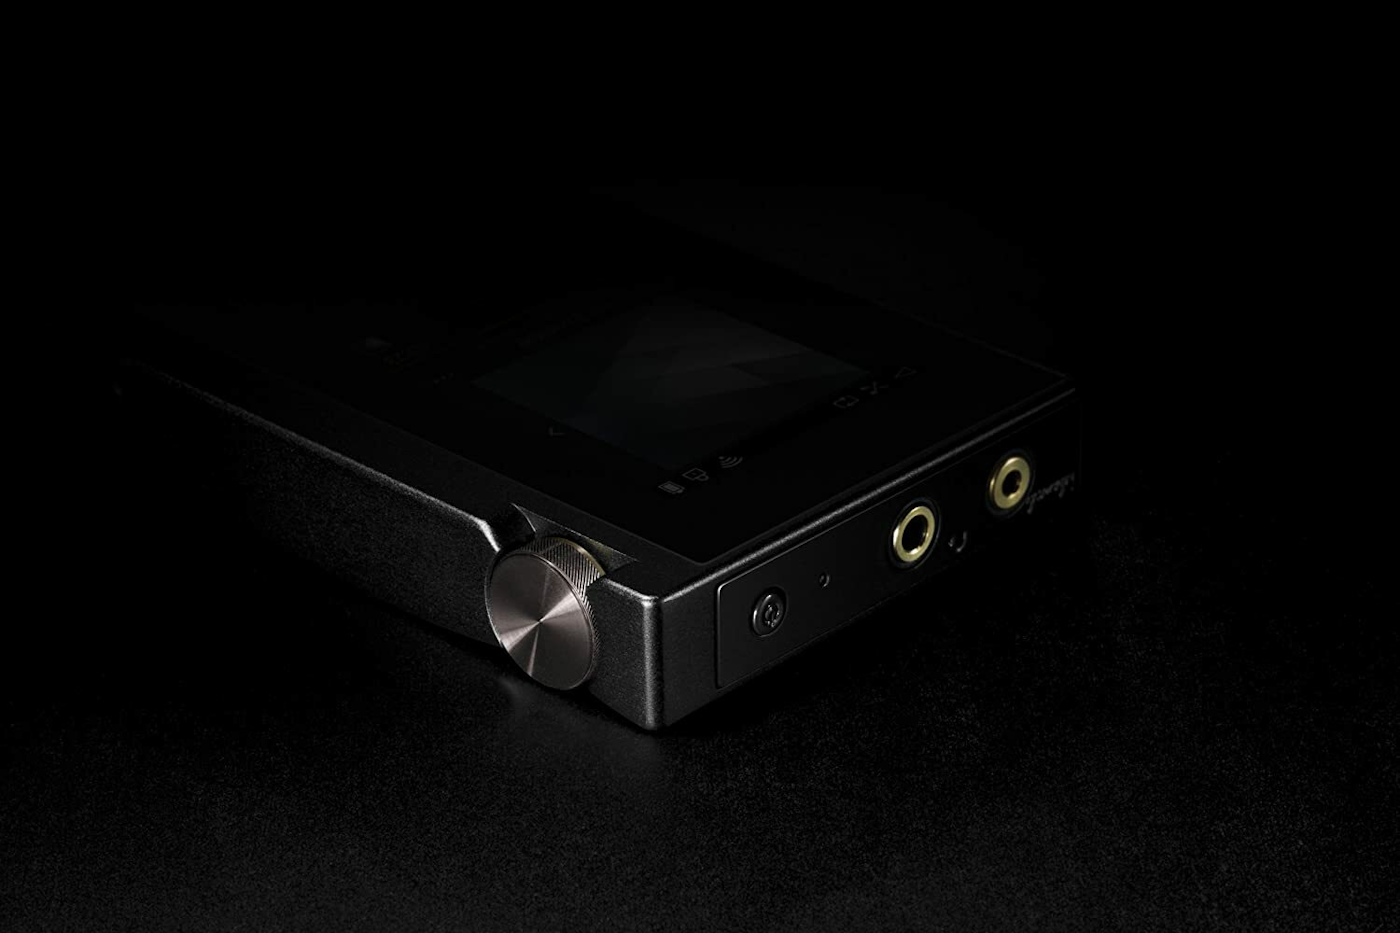 Close-up of PD-S10B Digital Audio Player on black background